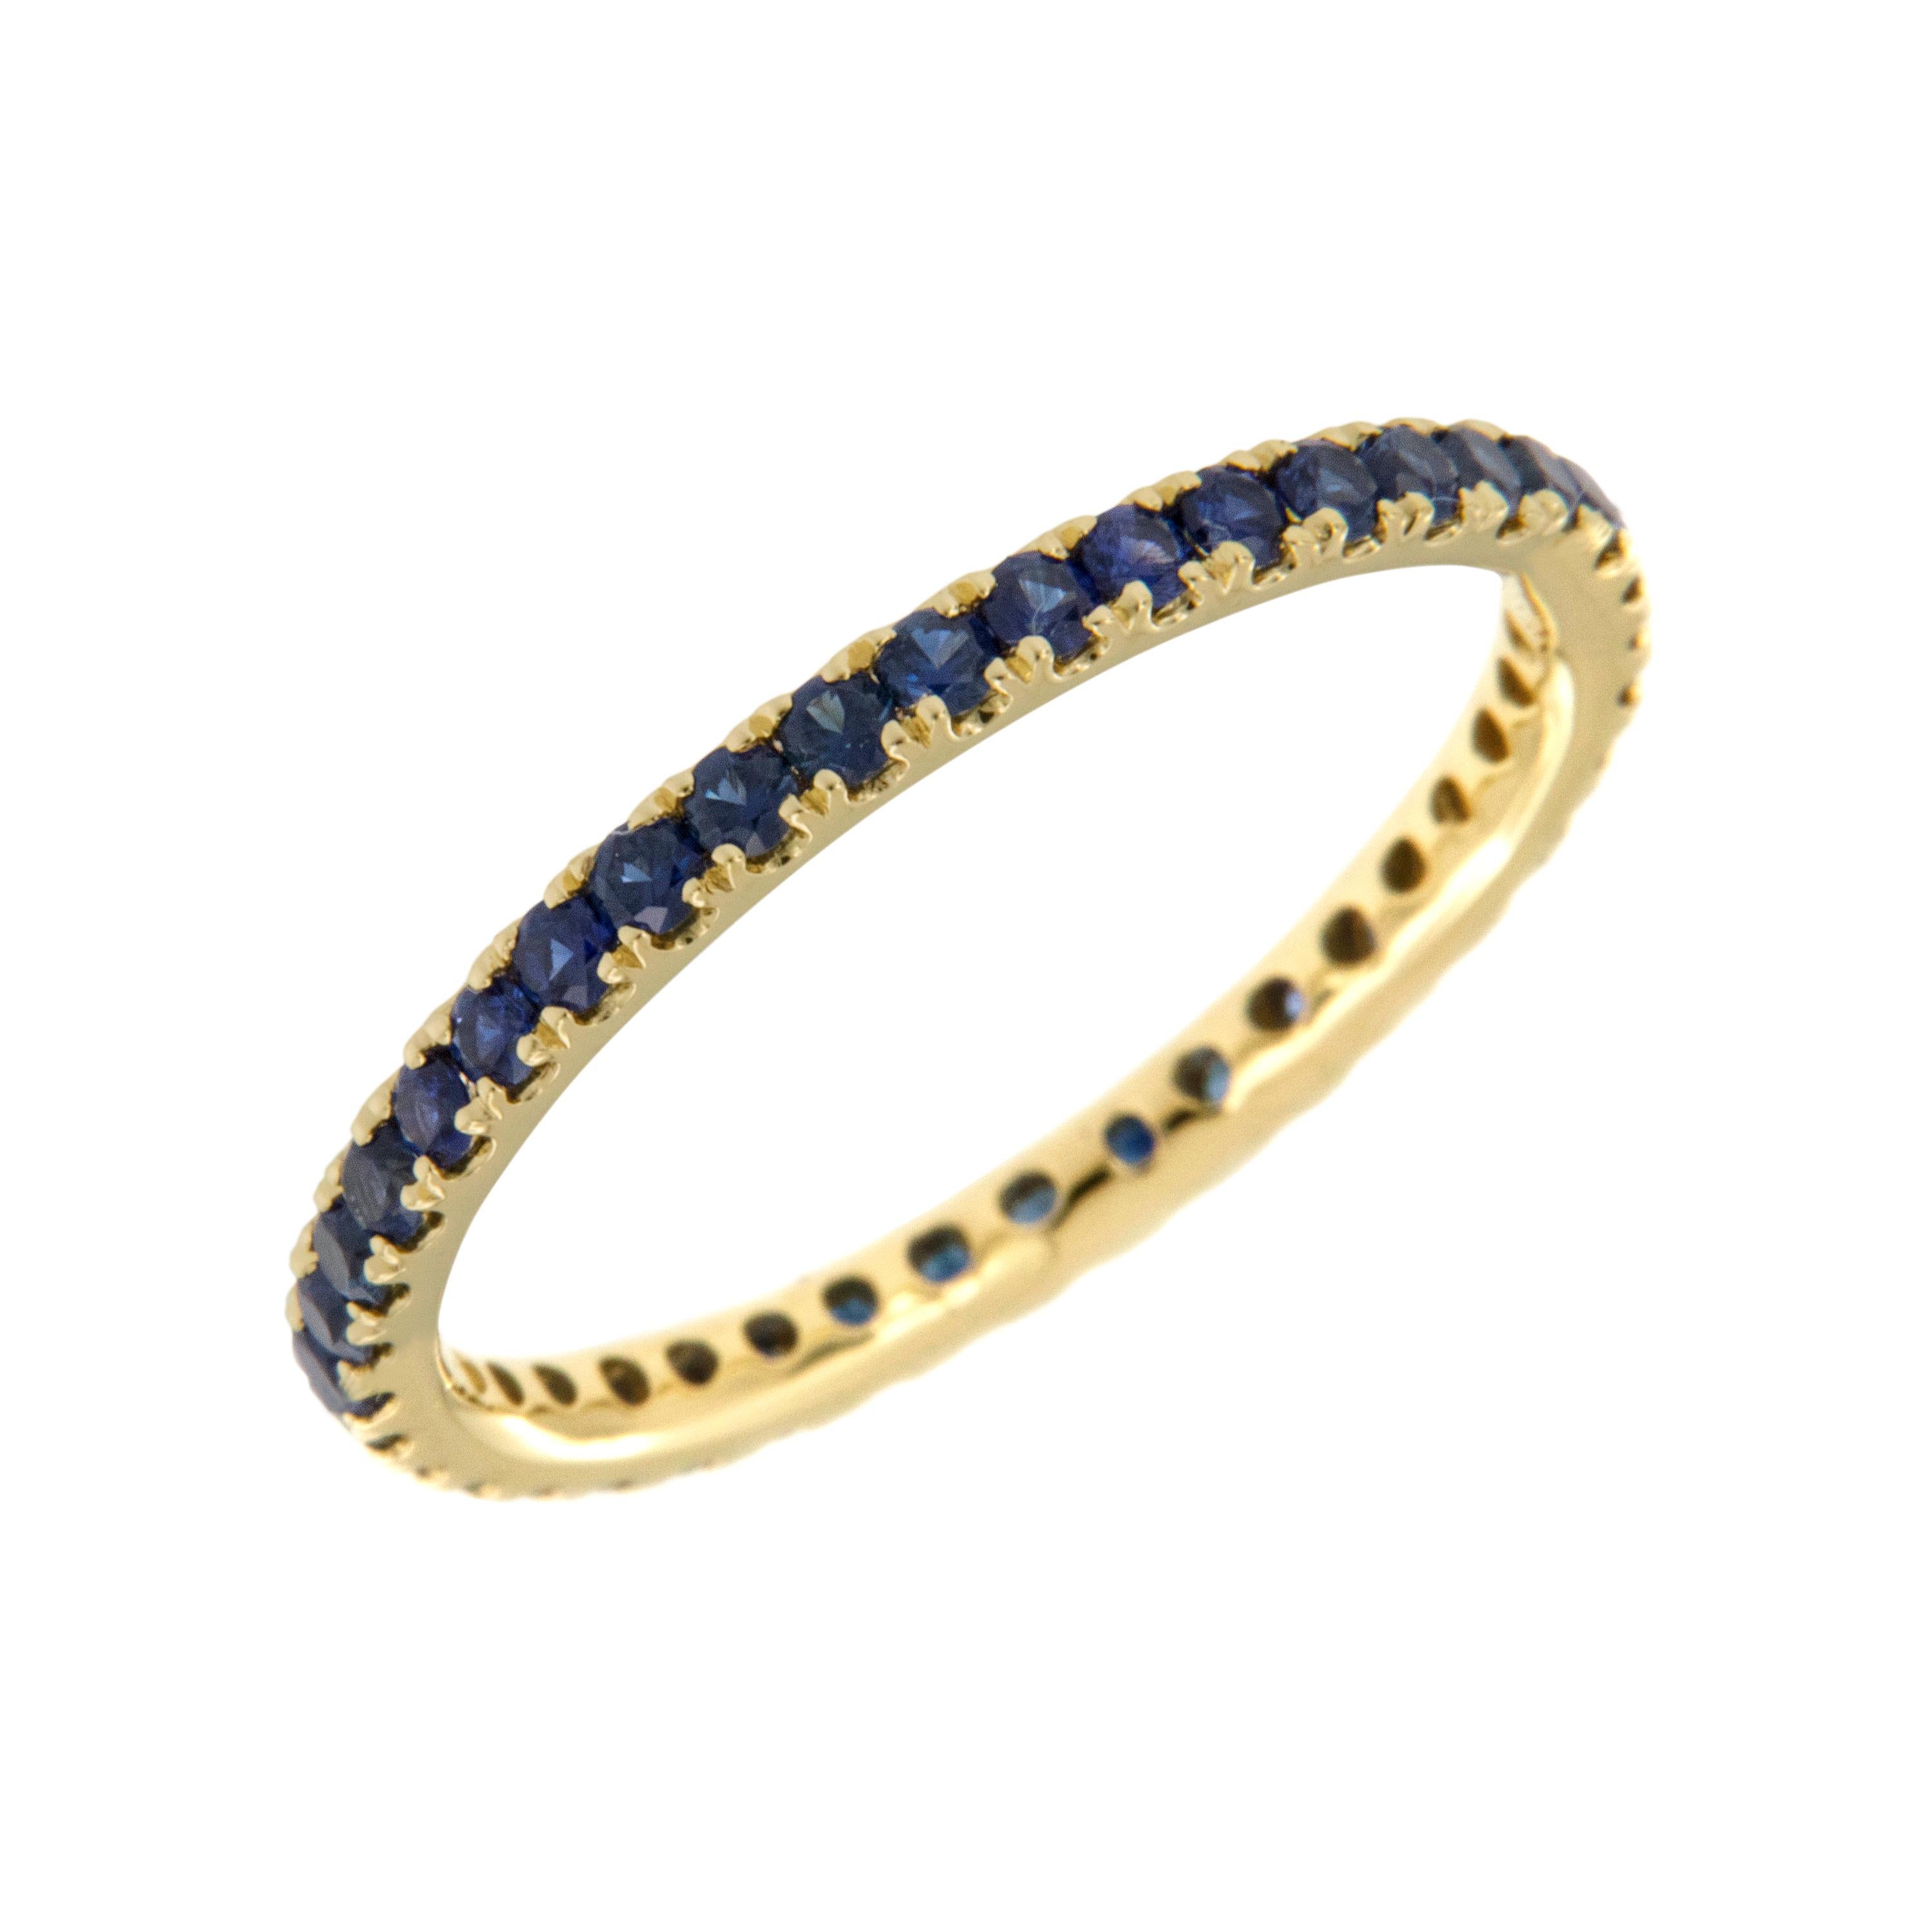 Serine is this 18 karat yellow gold blue sapphire eternity ring with 39 sapphires = 0.78 Cttw in a size 6! Sapphire is the birthstone for September and also given as a gem for the 5th, 23rd and 45th wedding anniversaries. This ring looks fantastic